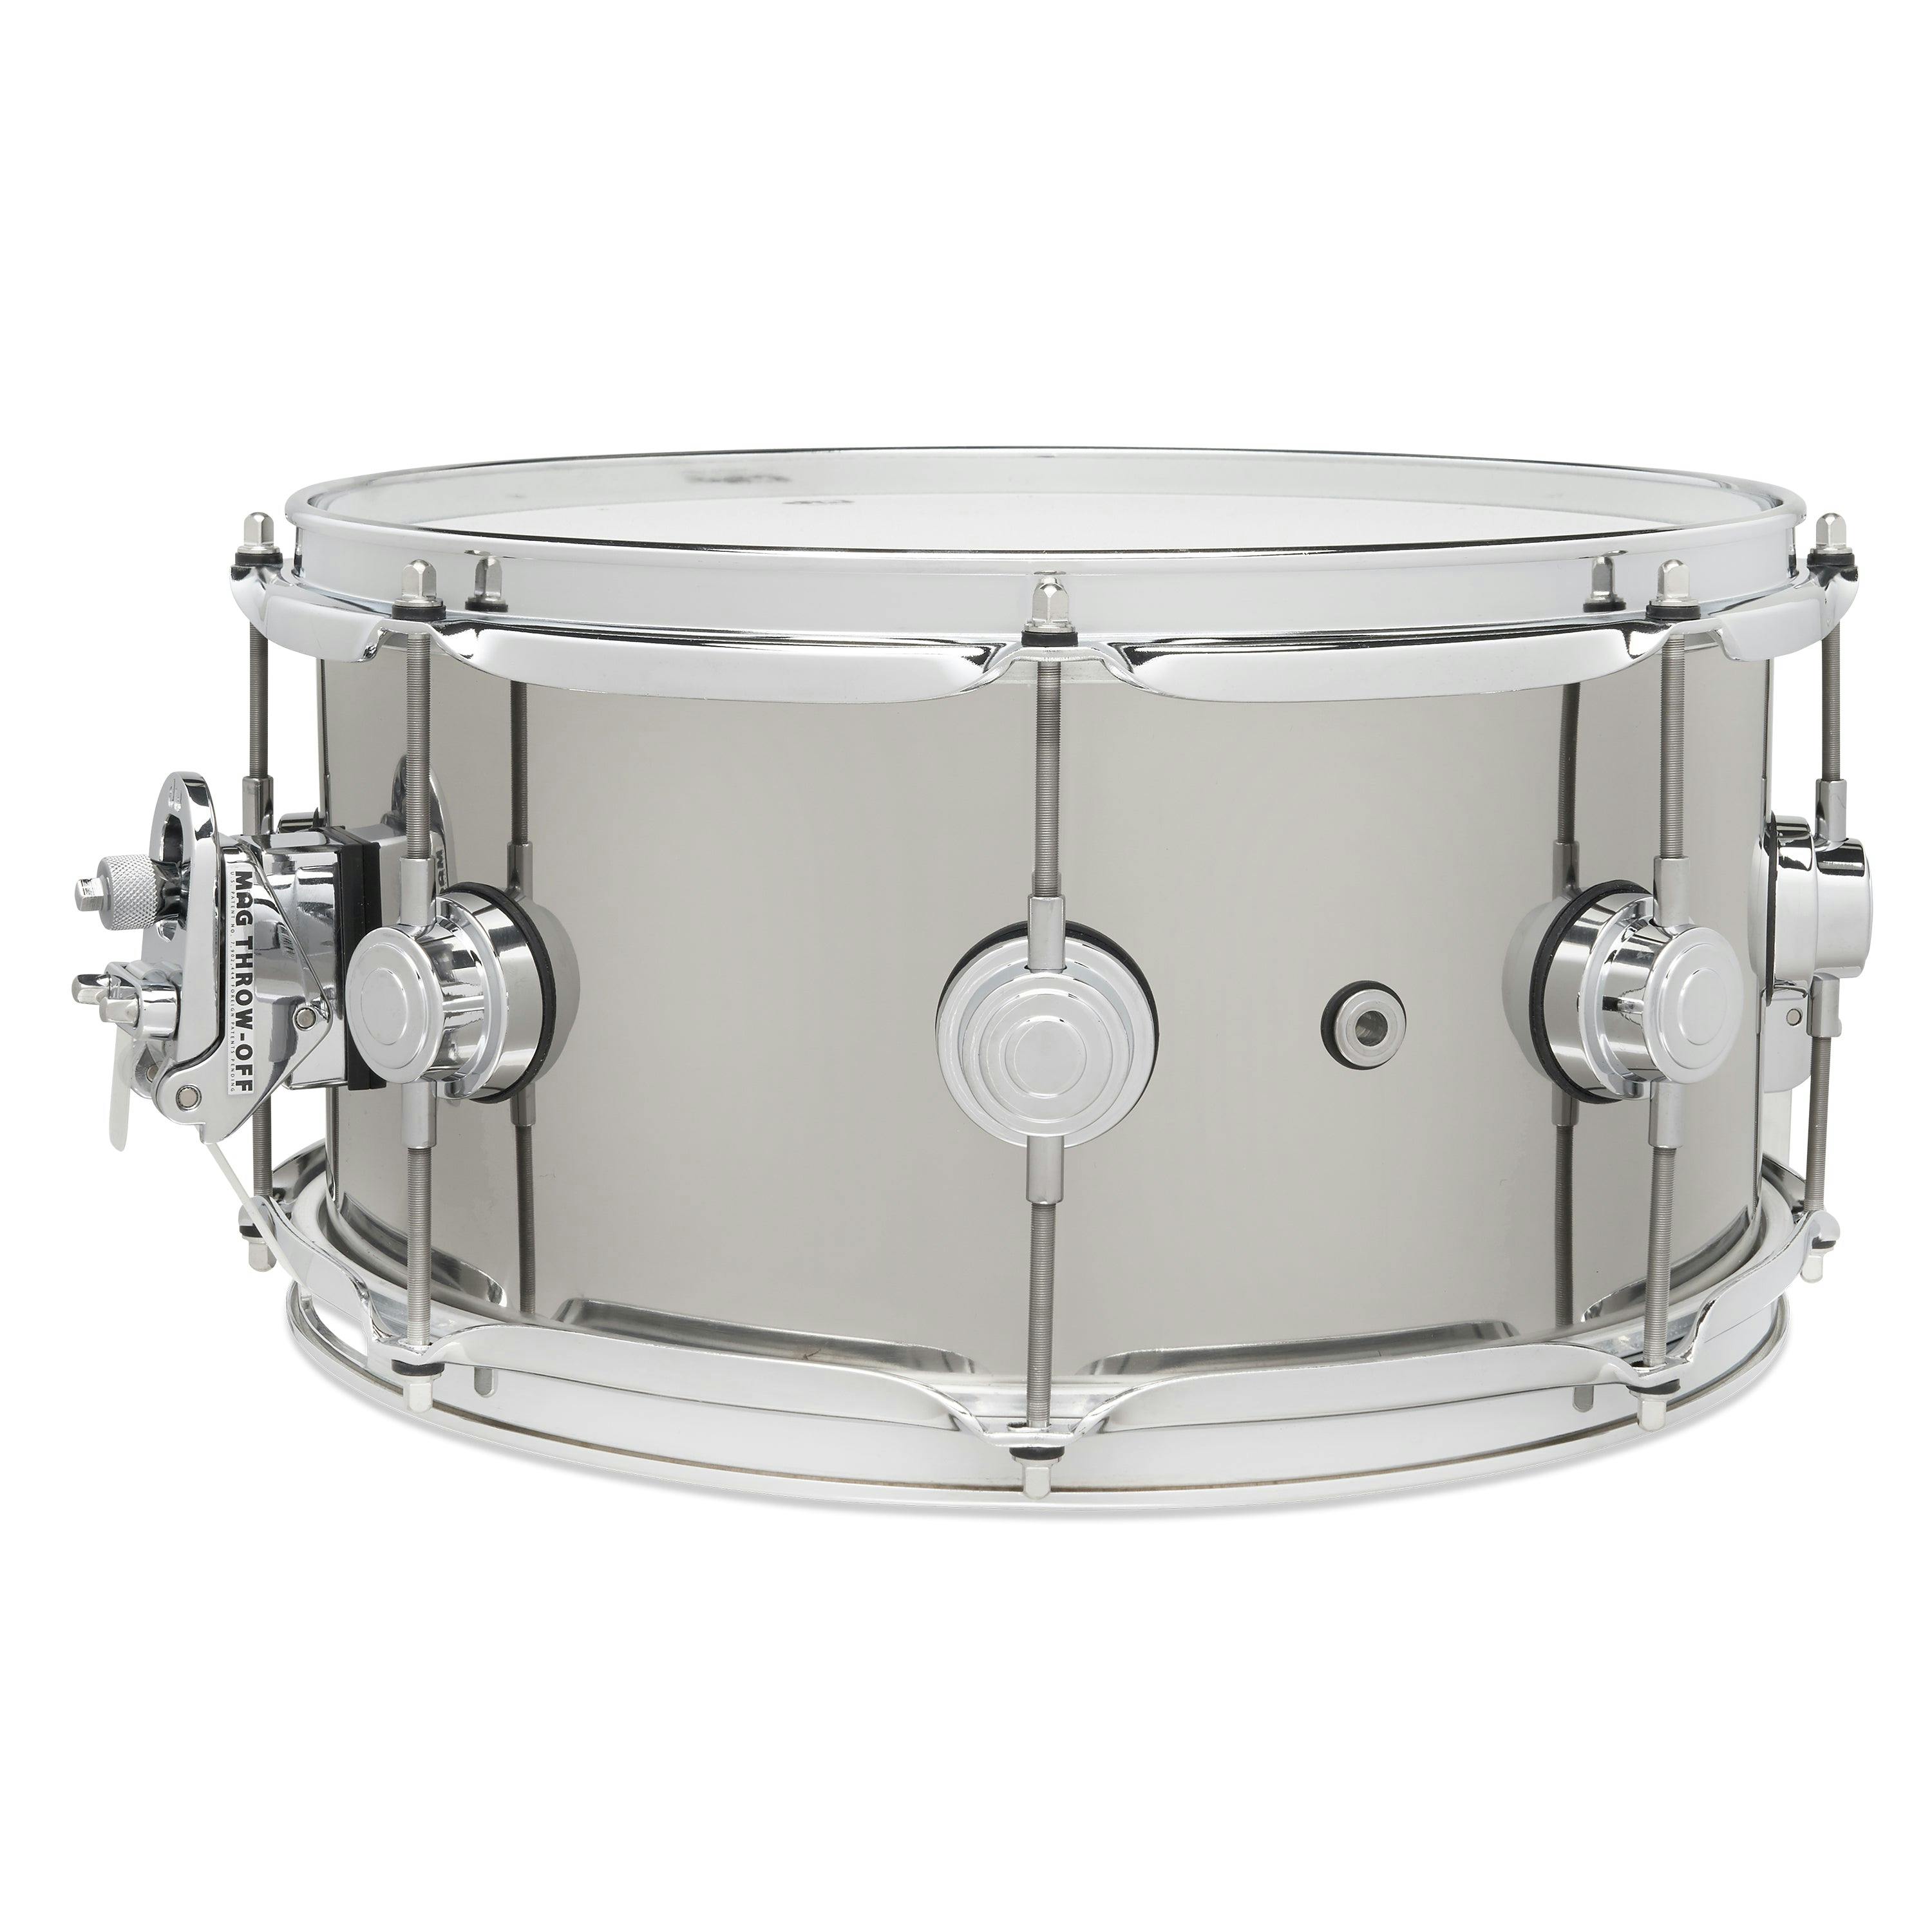 Stainless Steel Snare Drum 6.5x13